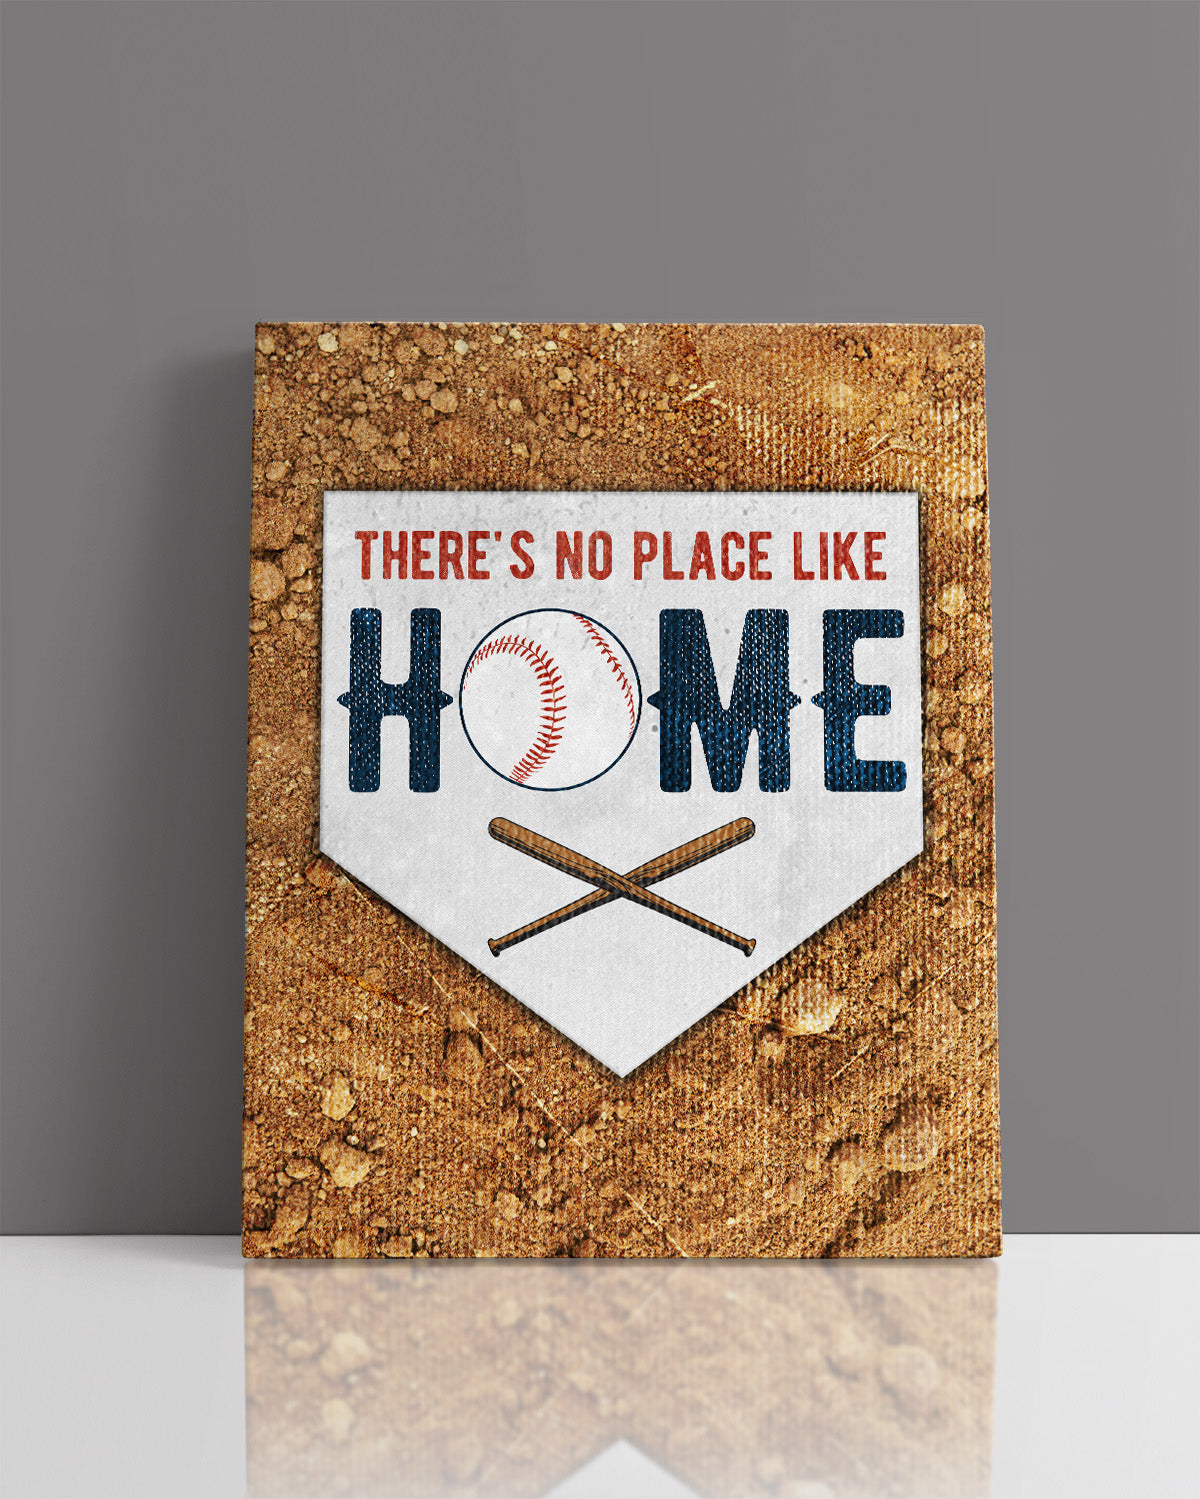 There's No Place Like Home - Baseball Motivational Sports Quotes - Baseball Wall Art for Boys Bedroom, Baseball Coach Gift - Inspirational Baseball Wall Decor